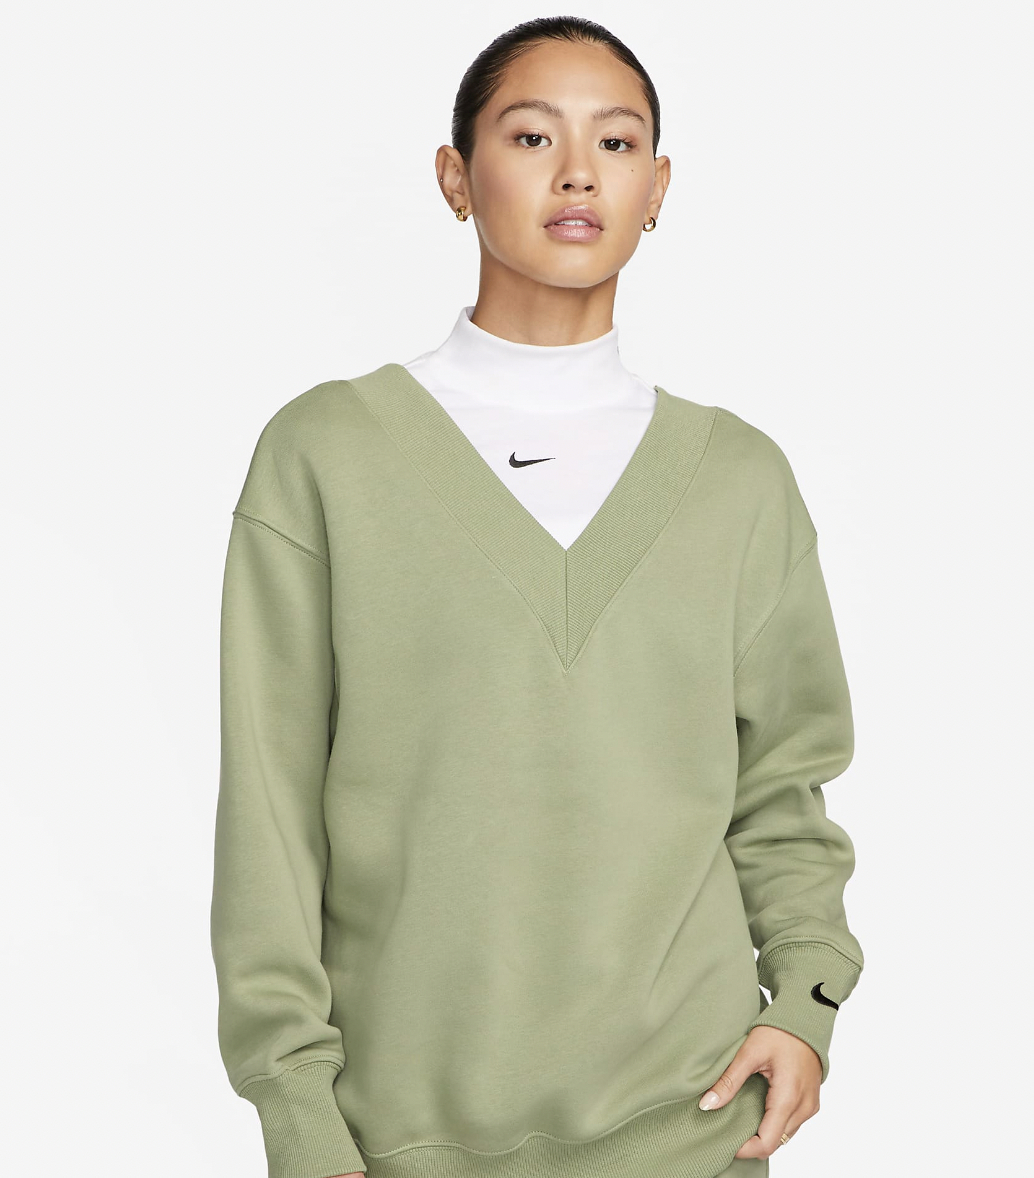 A model wearing the sweater in green